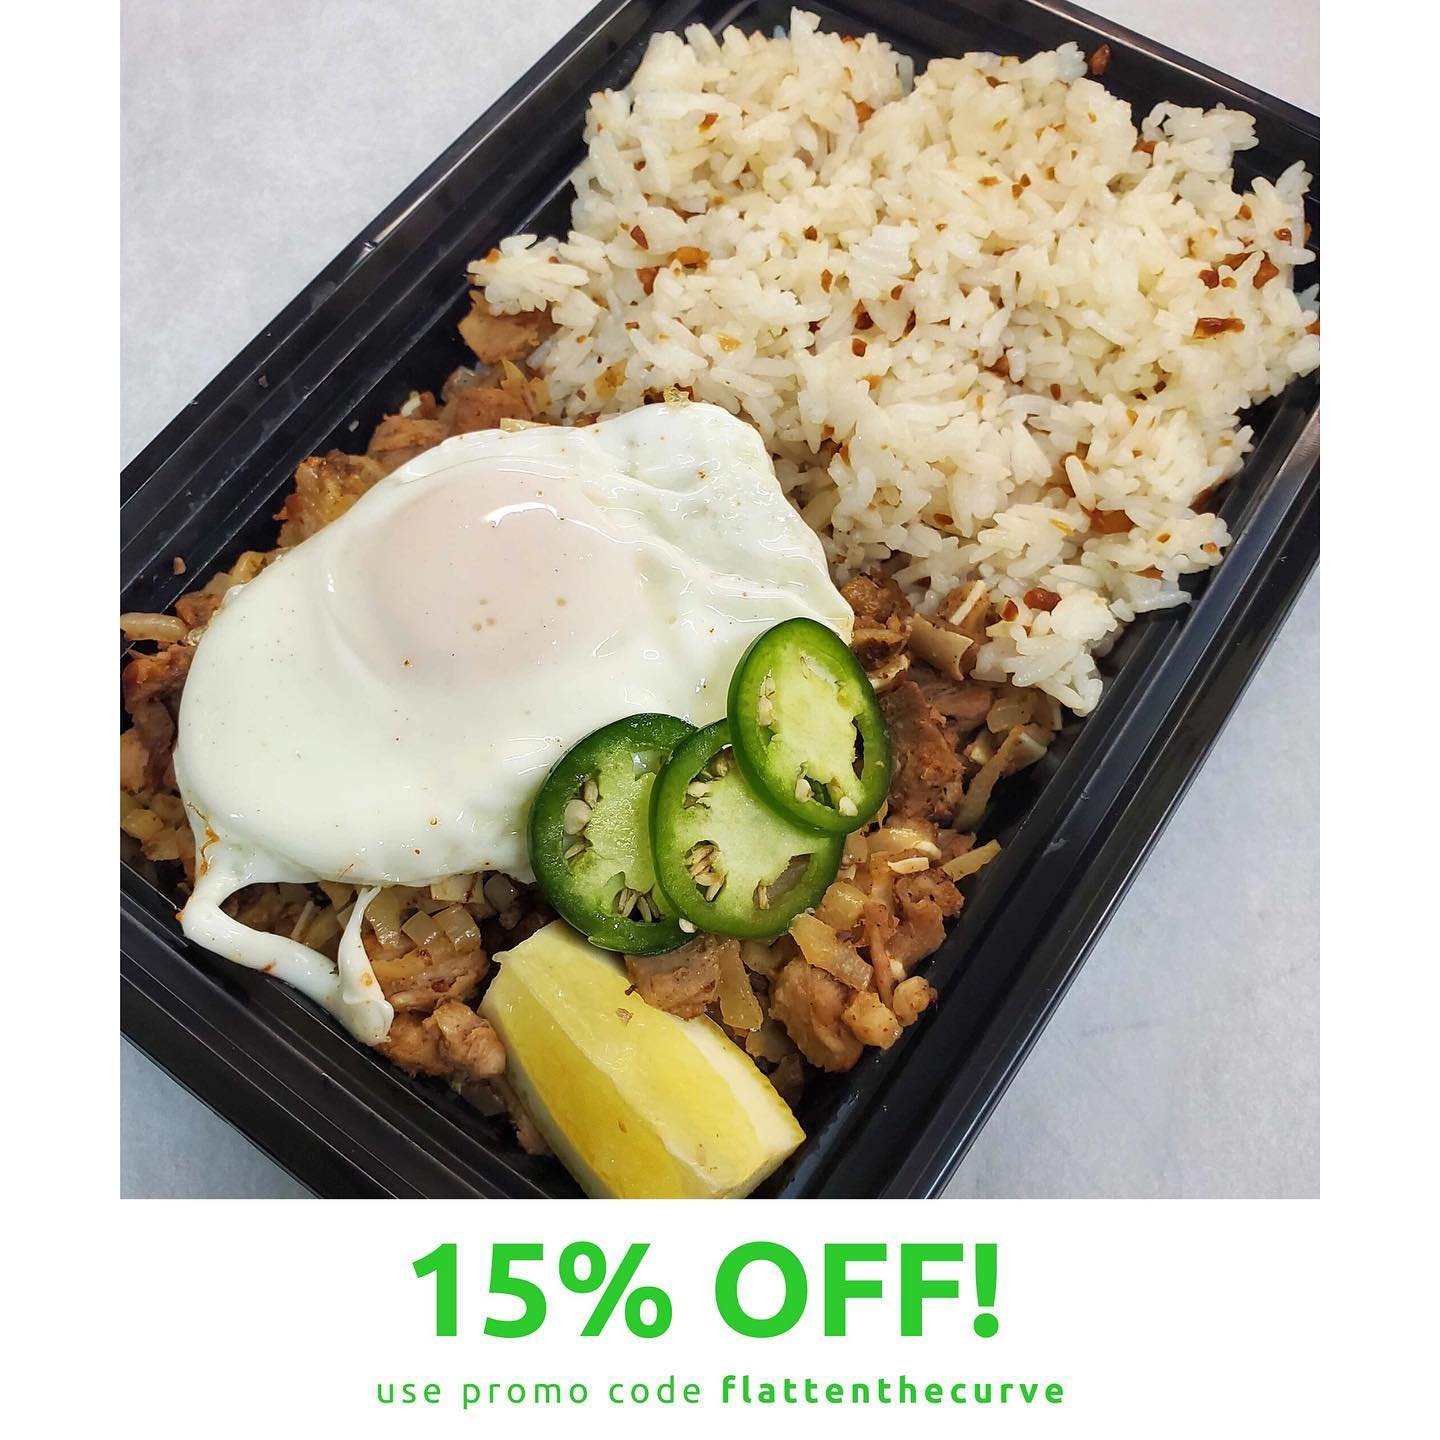 Happy Mother's Day to all of the loving, hard working moms out there! Treat yourself to some Filipino favorites and get 15% off your first order, promo code flattenthecurve. We're cooking up some amazing Sisig (marinated chopped pork or tofu) and BBQ